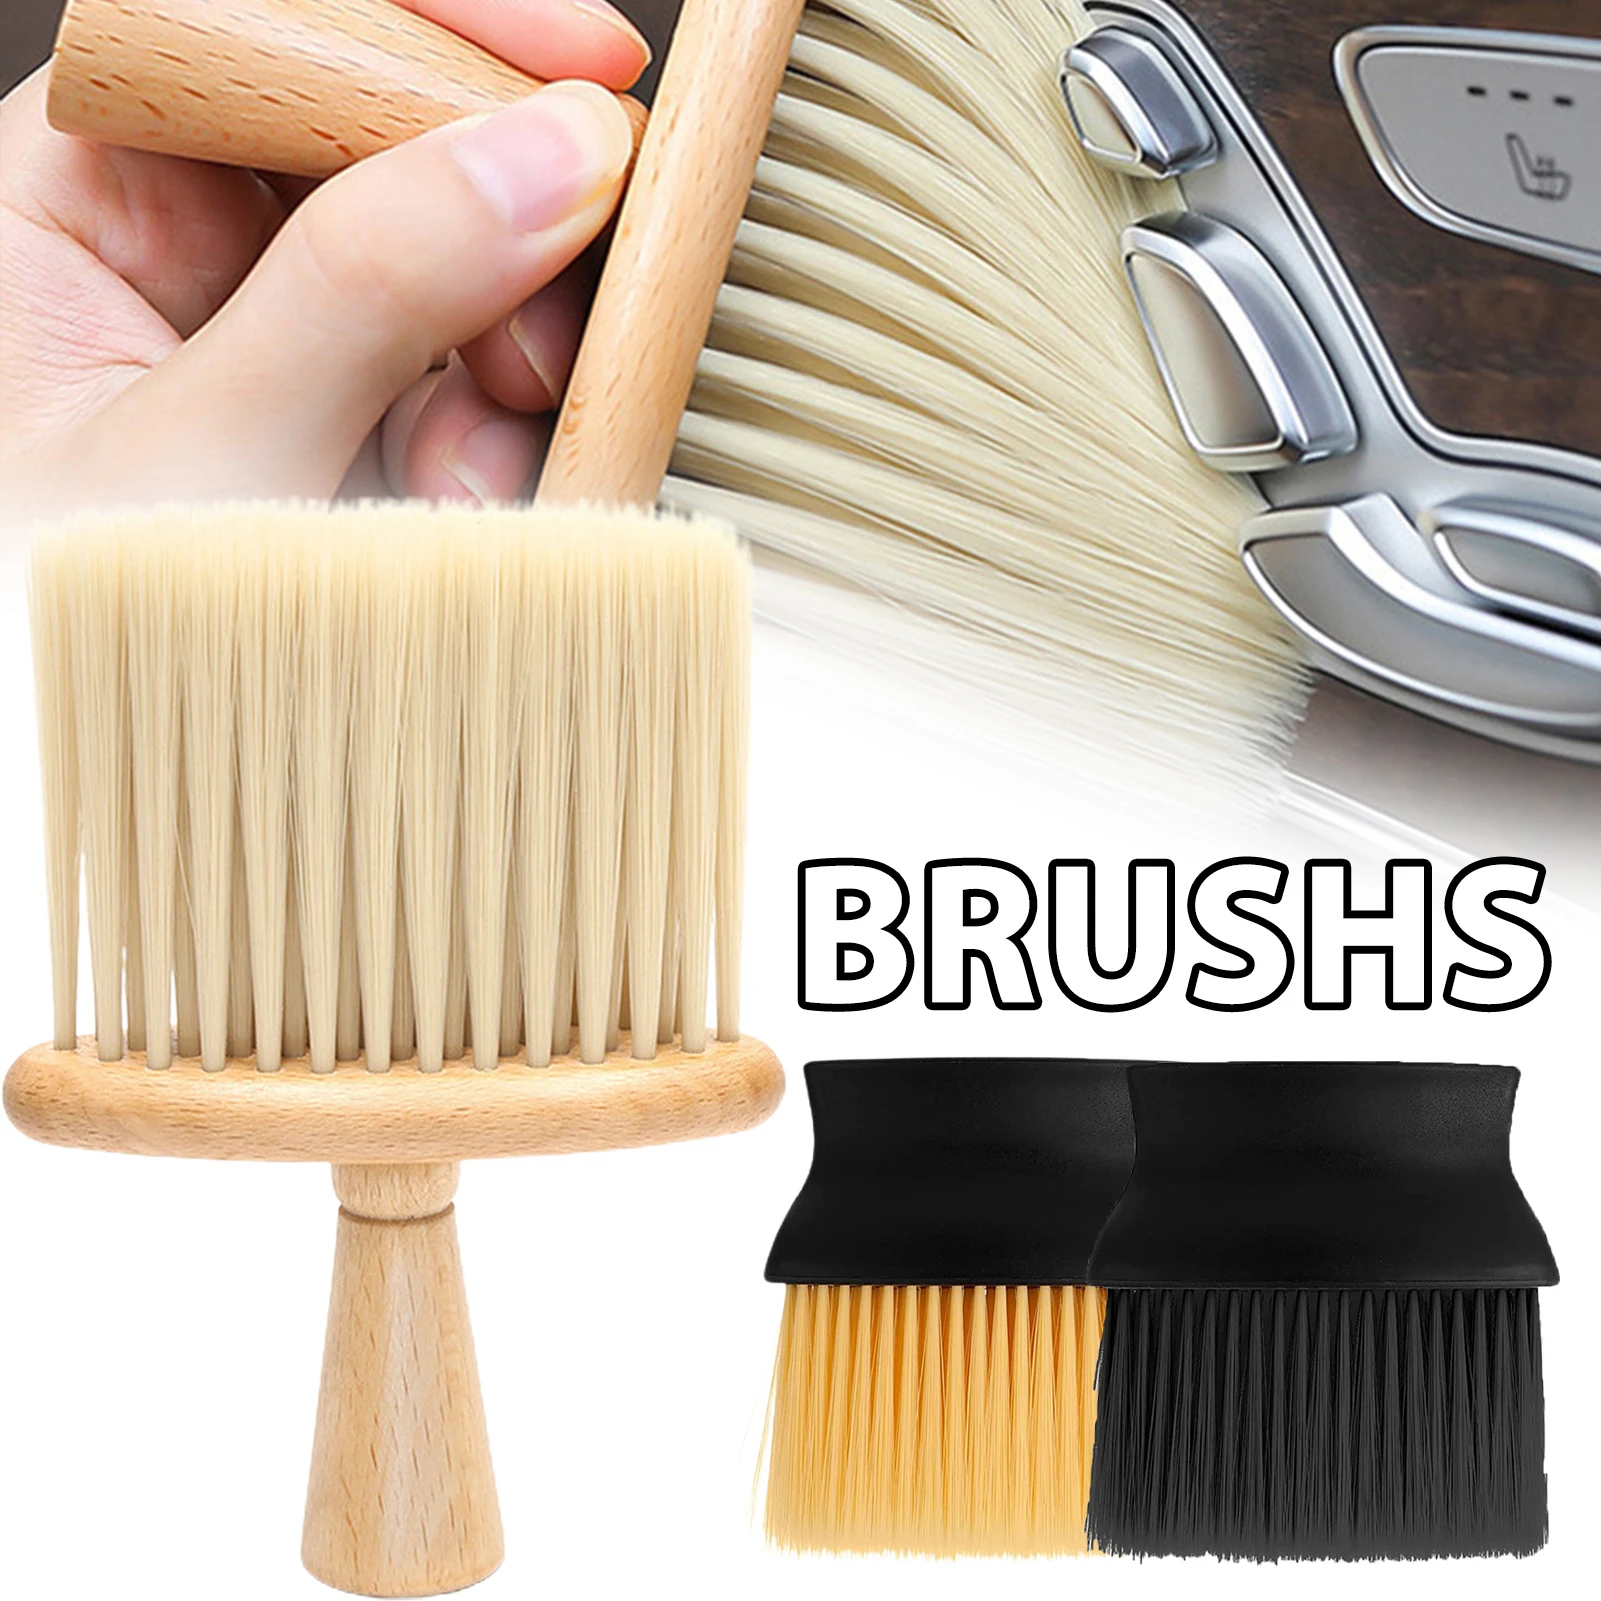 

Car Interior Dust Brush Soft Bristles Detailing Brush Dusting Tool Scratch Free with Handle for Window Slit Dusting Wood